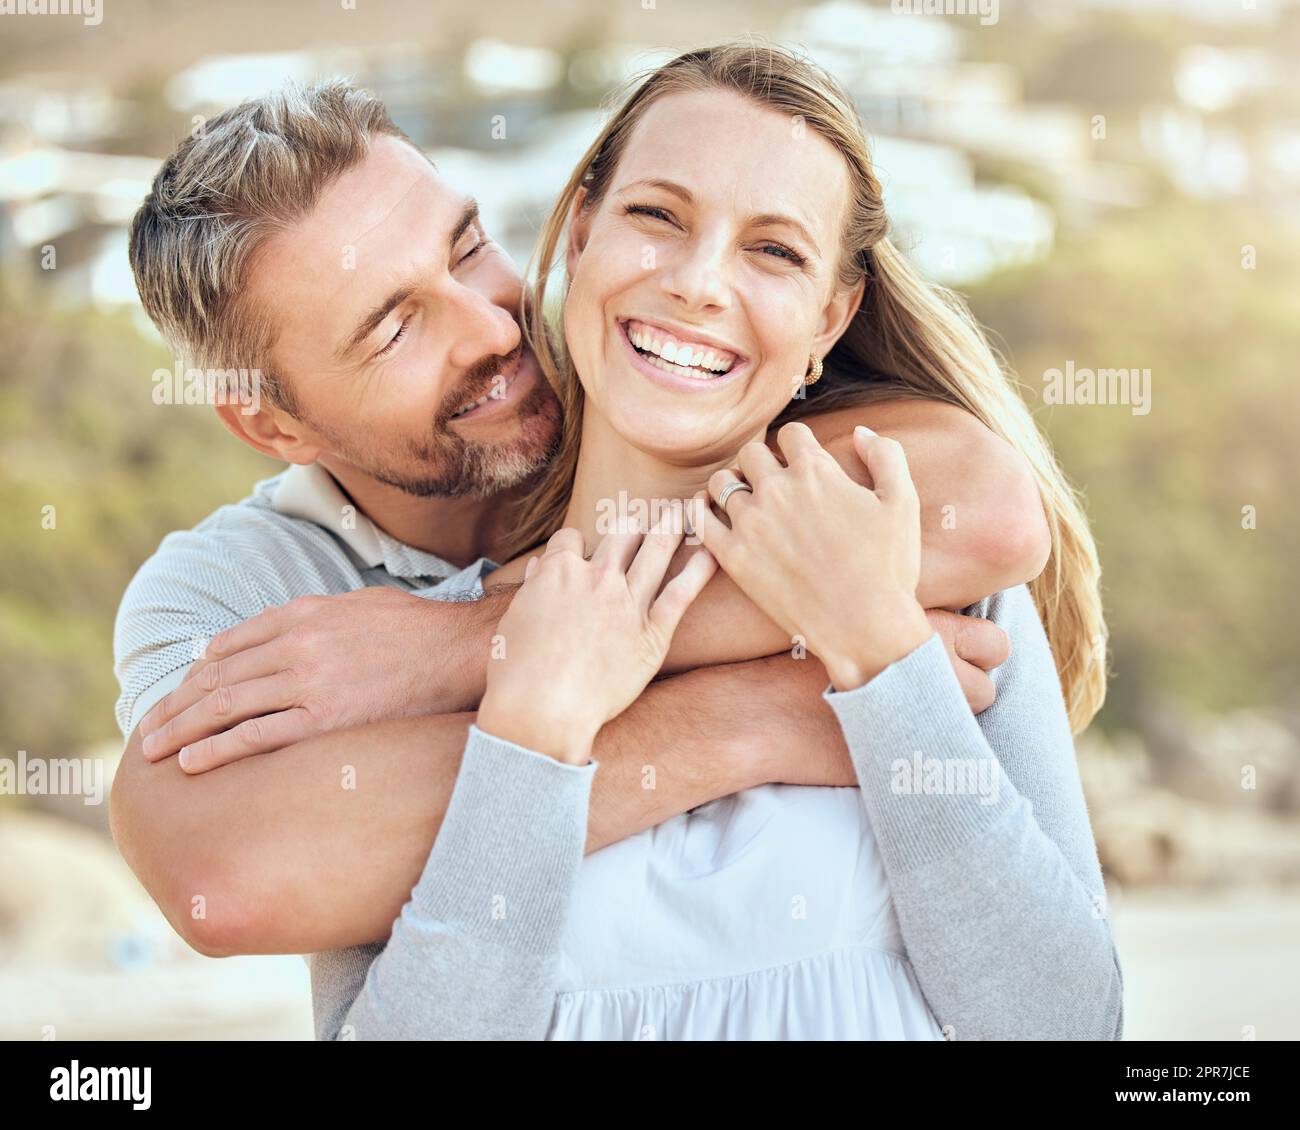 Happy and loving mature caucasian couple enjoying a romantic date at the beach together on a sunny day. Cheerful affectionate husband hugging arm around wife while bonding on vacation outdoors Stock Photo